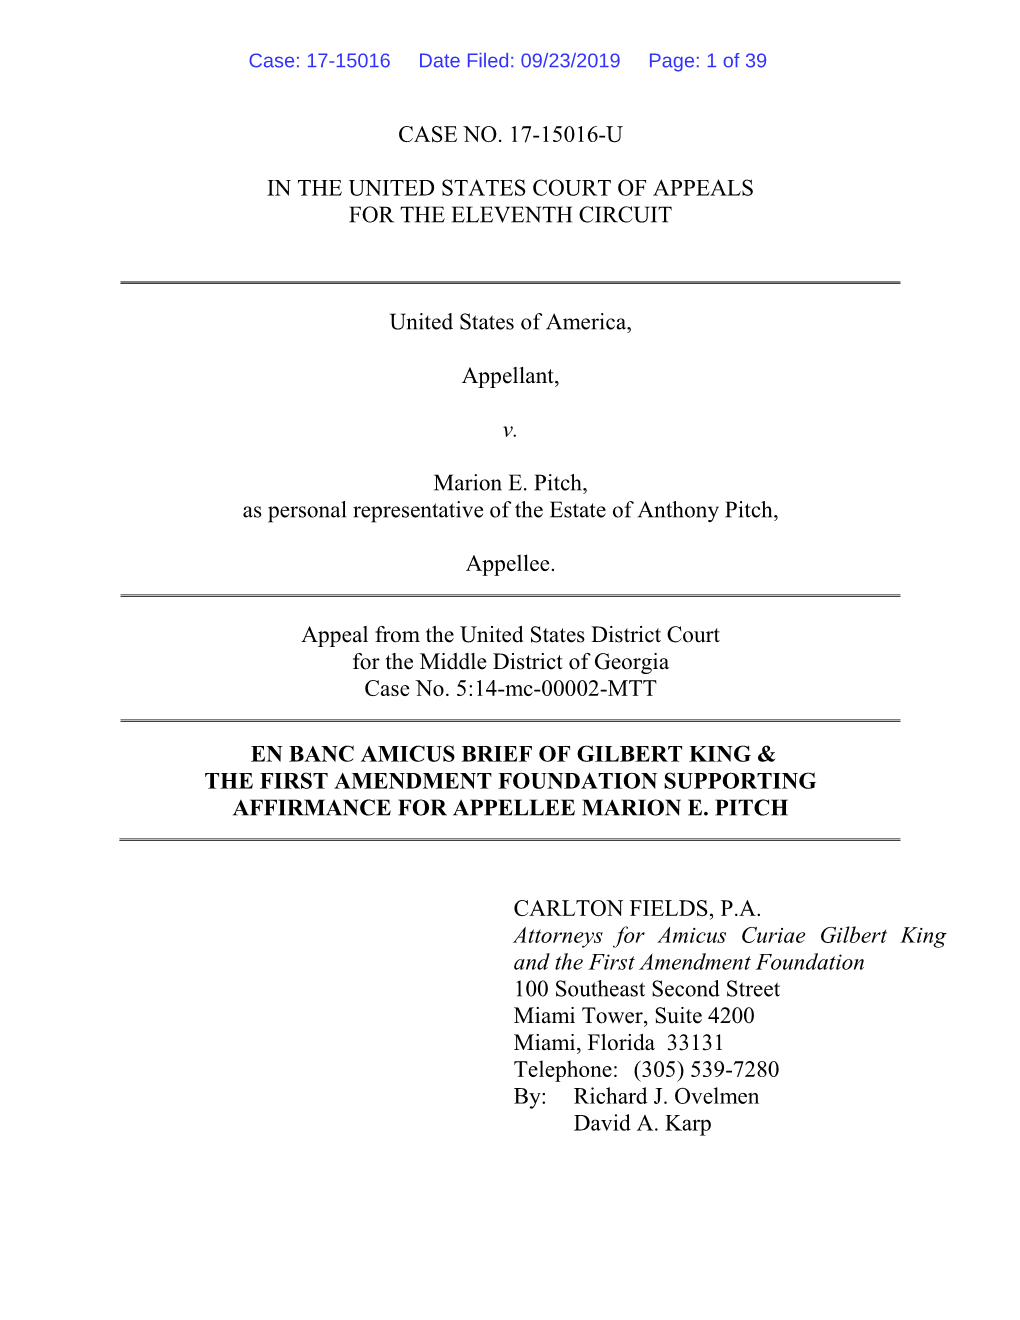 An Amicus Brief for King and the First Amendment Foundation